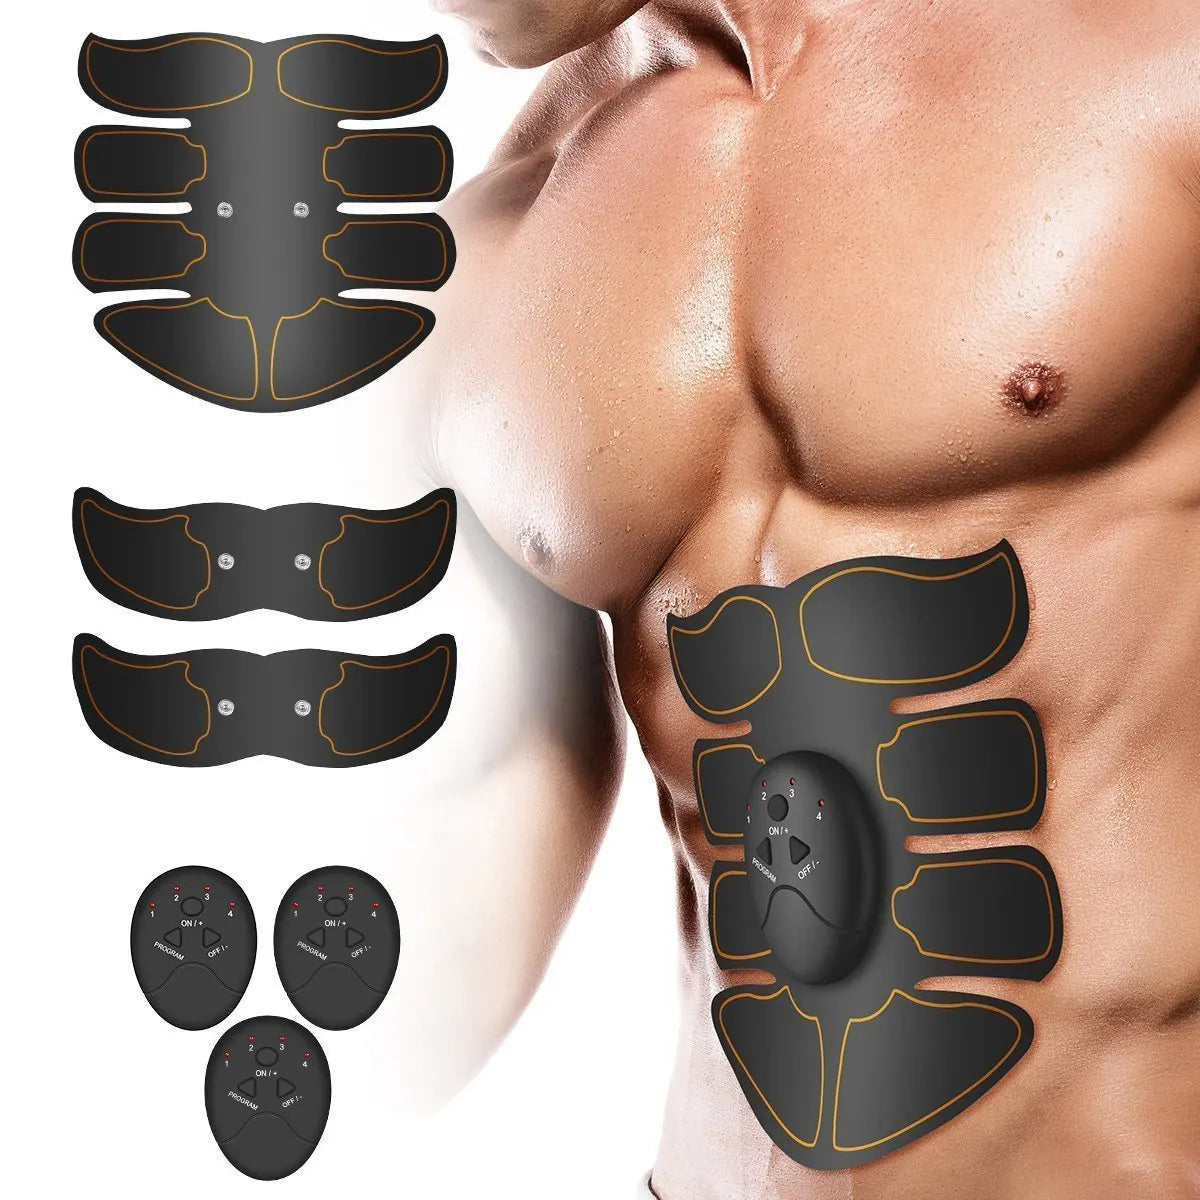 Smart Muscle Stimulator Trainer Fitness Abdominal , Electric Weight Loss EMS Wireless Stickers Body Slimming Massager